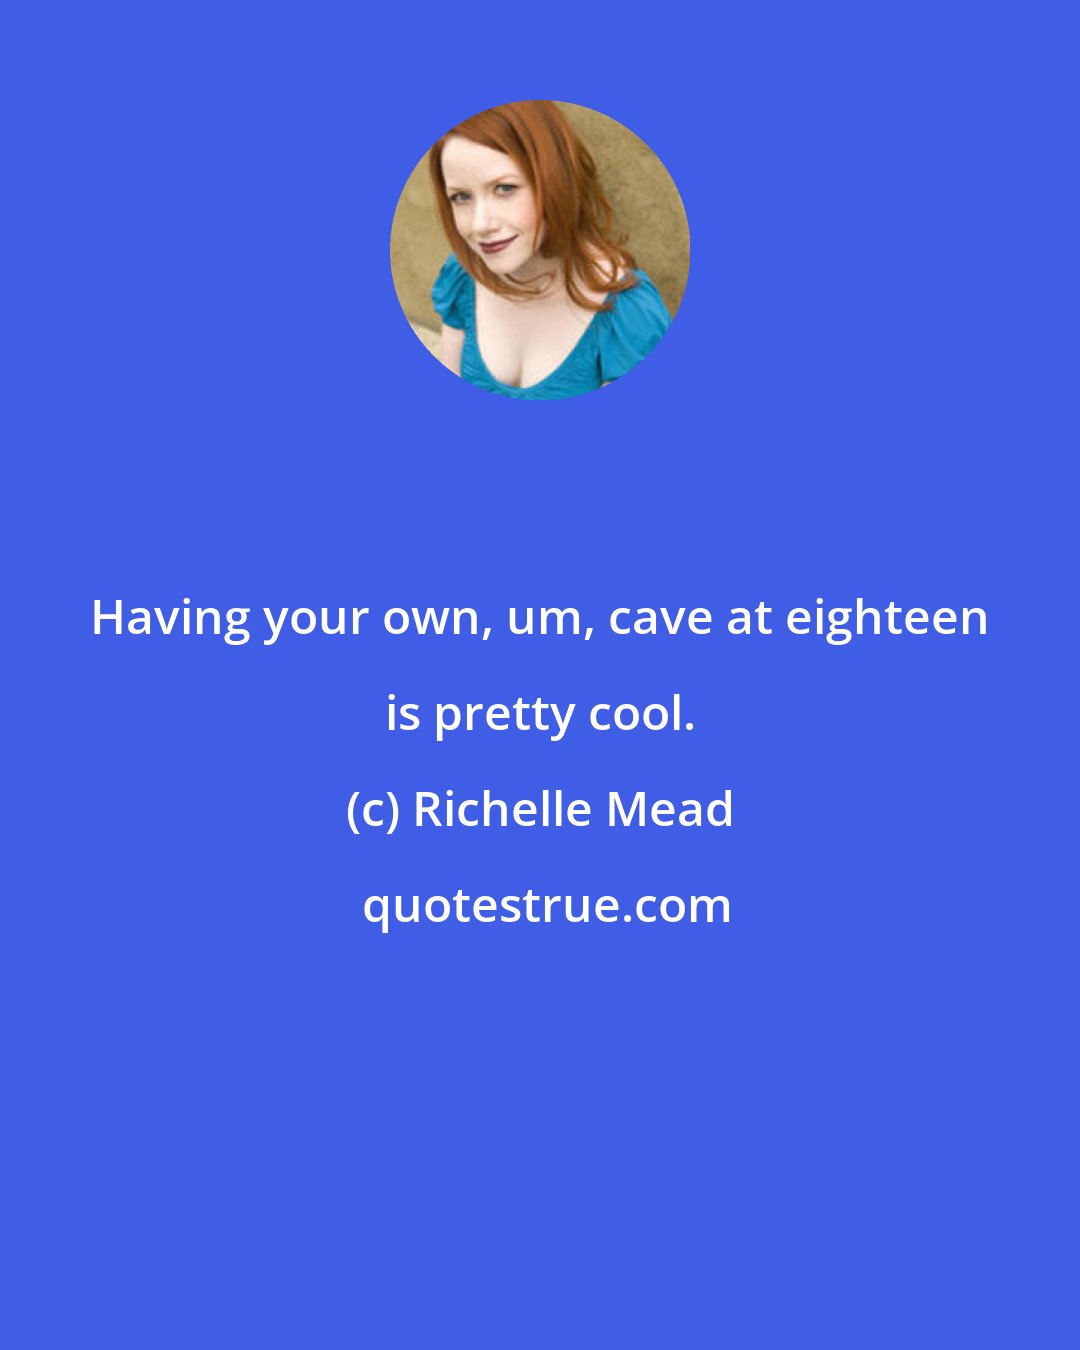 Richelle Mead: Having your own, um, cave at eighteen is pretty cool.